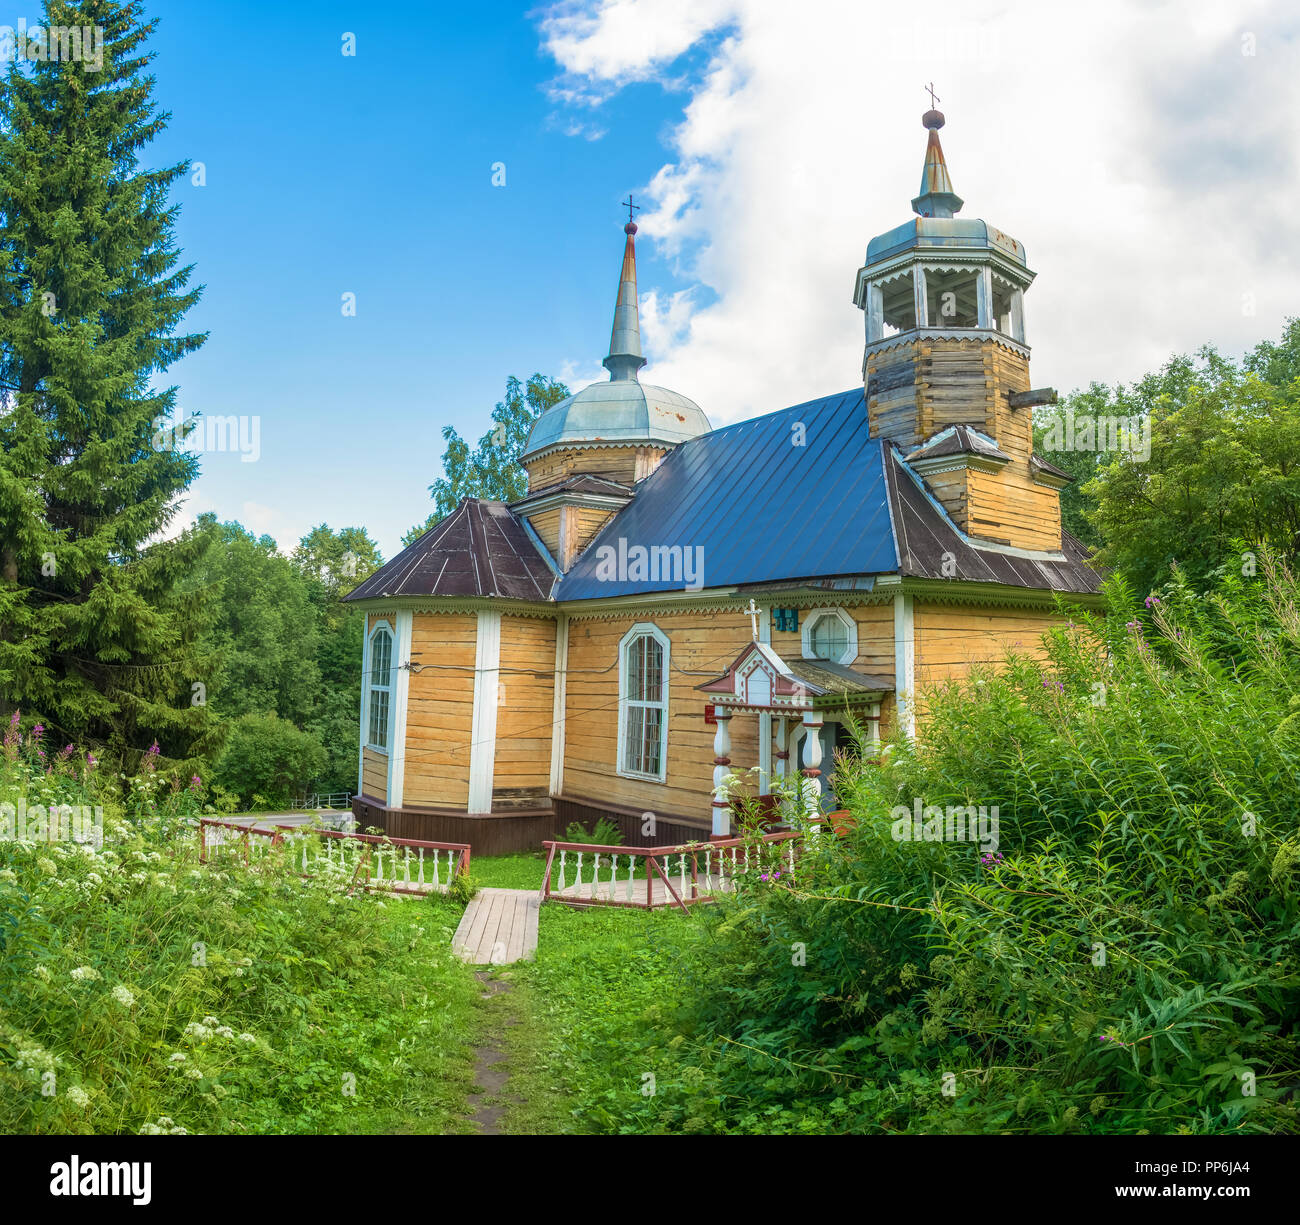 The village of Marcial waters, Karelia, Russia - August 8, 2017: The Wooden Church of the Apostle Peter 8 August 2017 in the village of Marcial waters Stock Photo